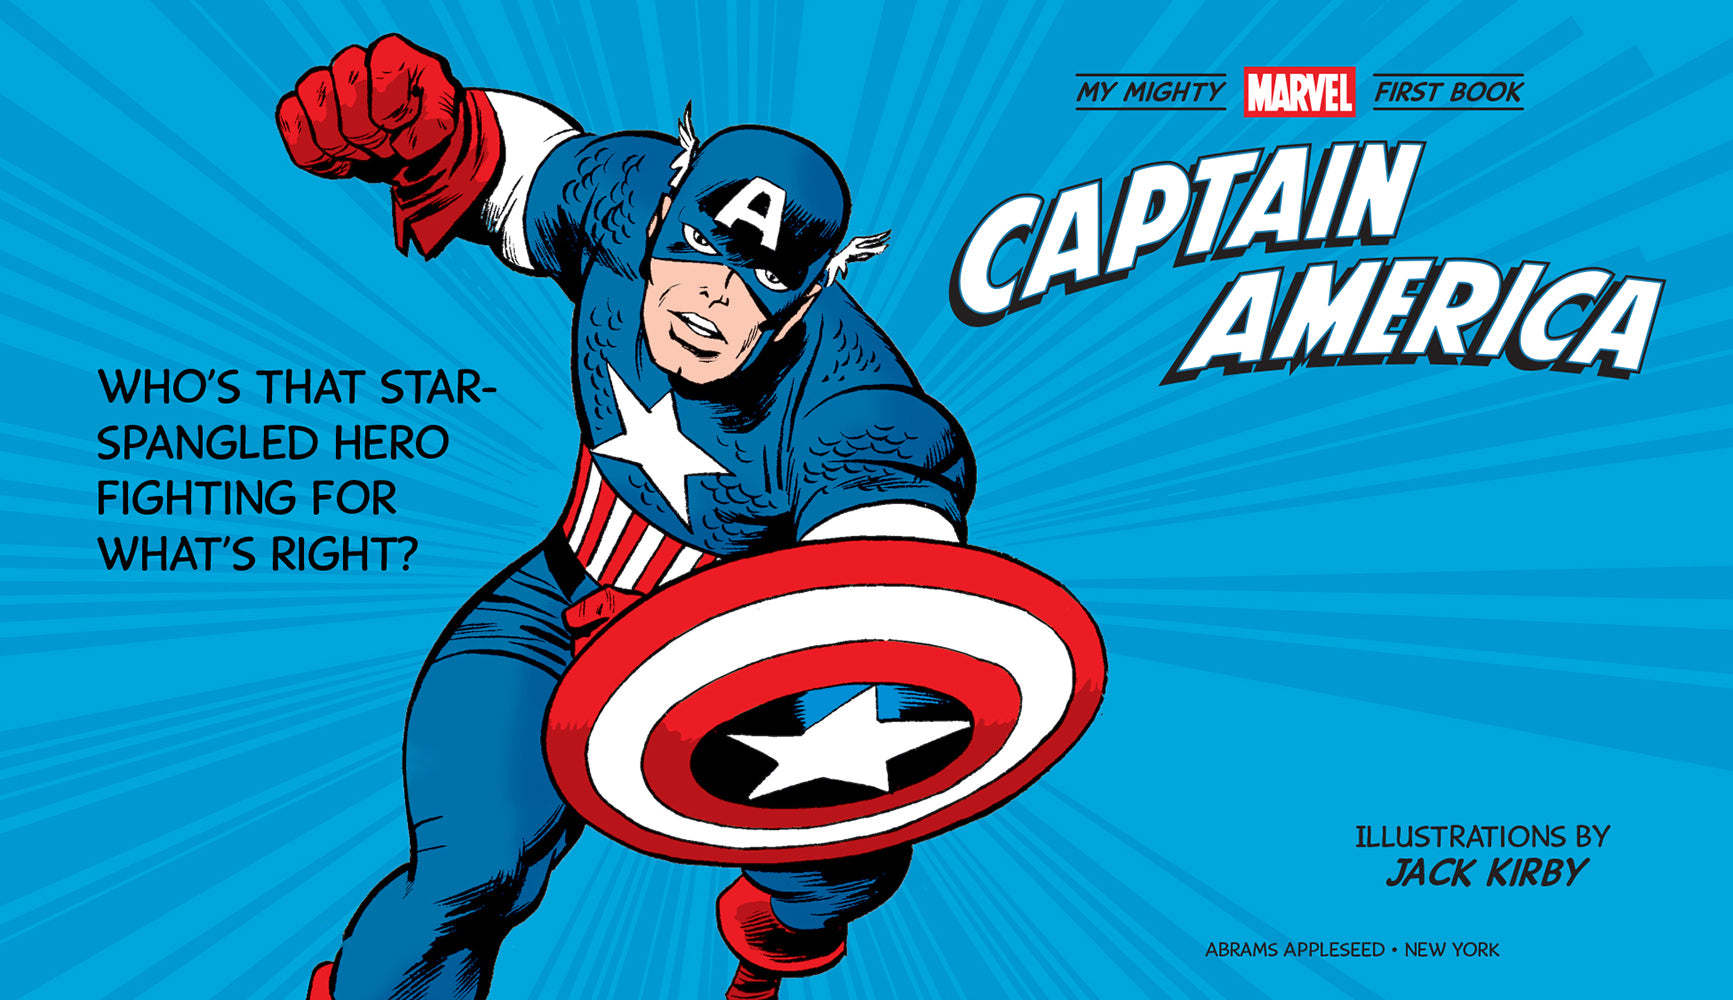 My Mighty Marvel First Book | Captain America available at Bear & Moo